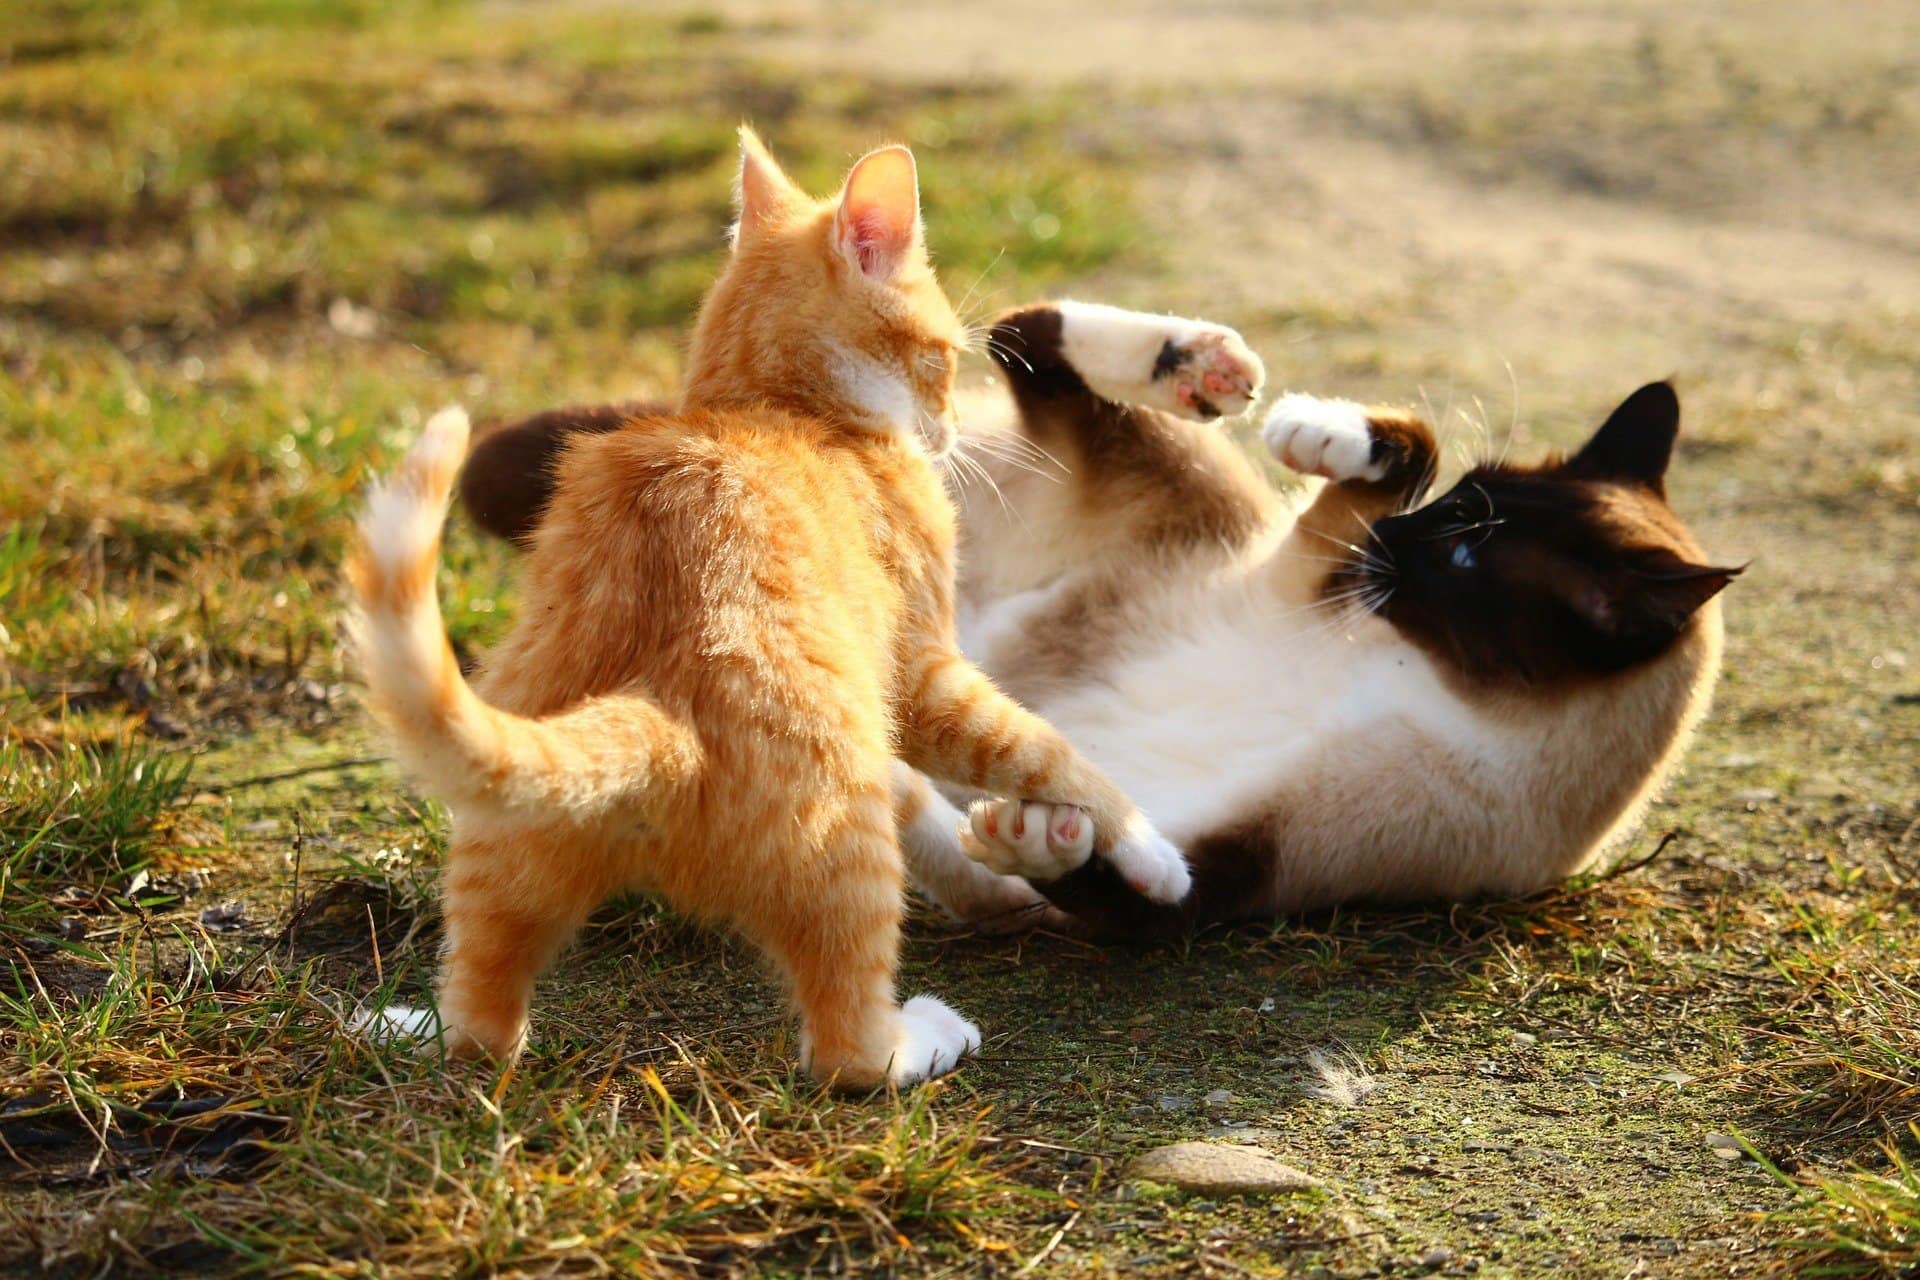 How to tell if cats are playing or fighting